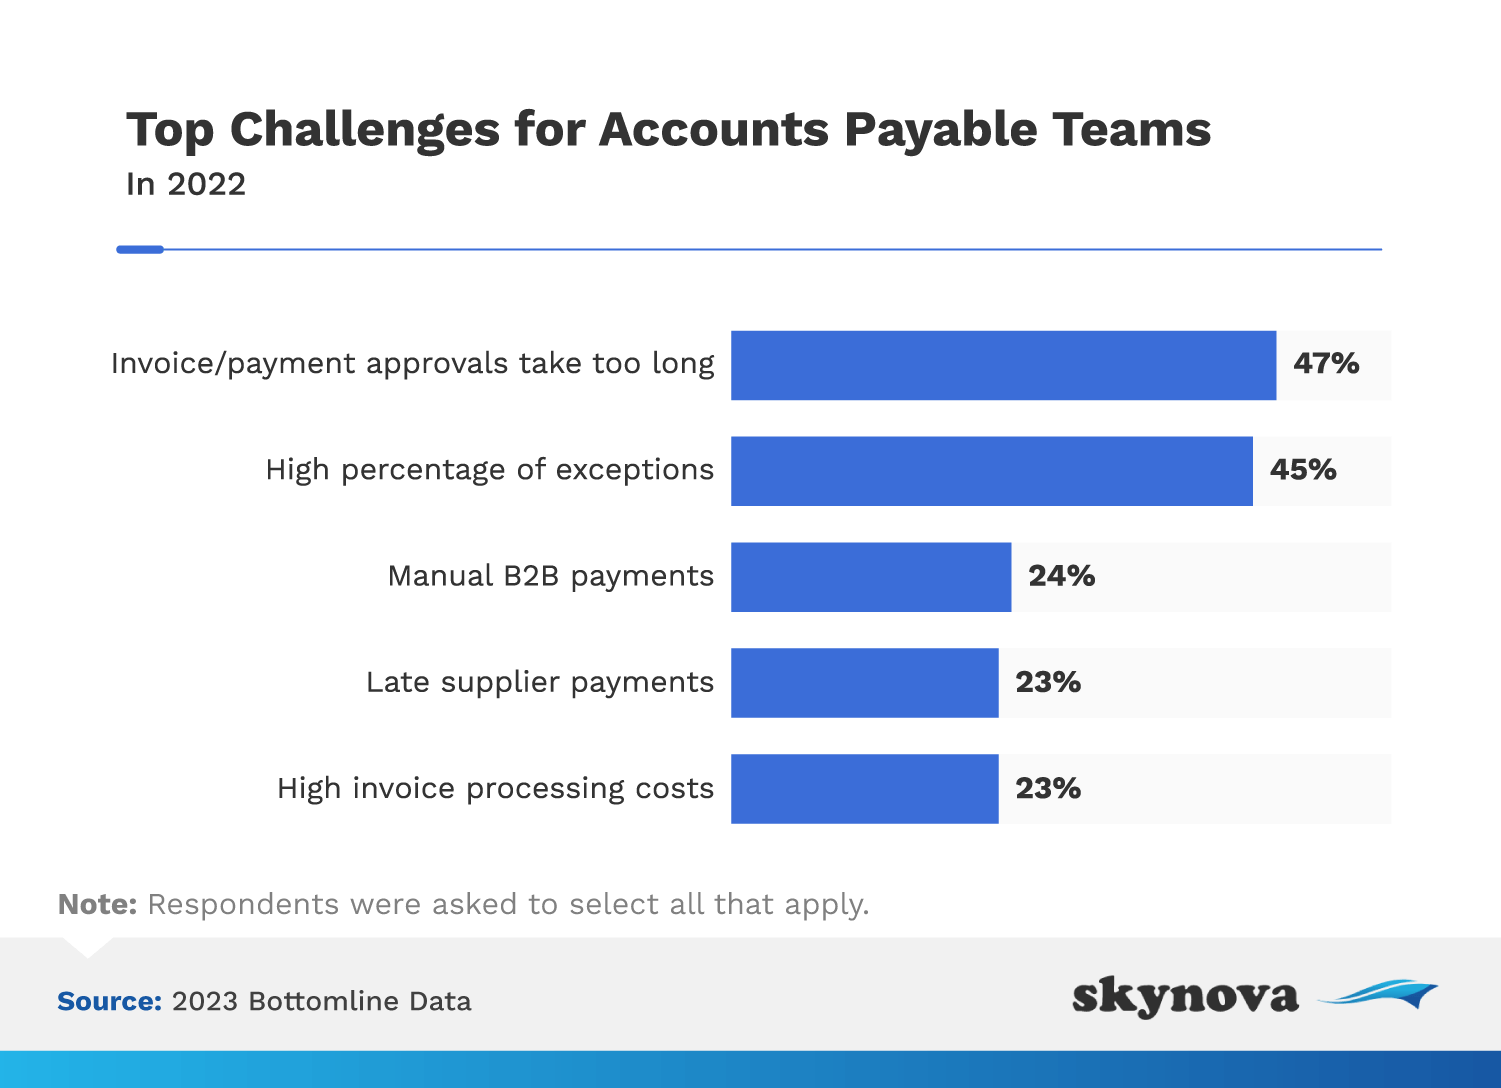 Poll: Top challenges for accounts payable teams